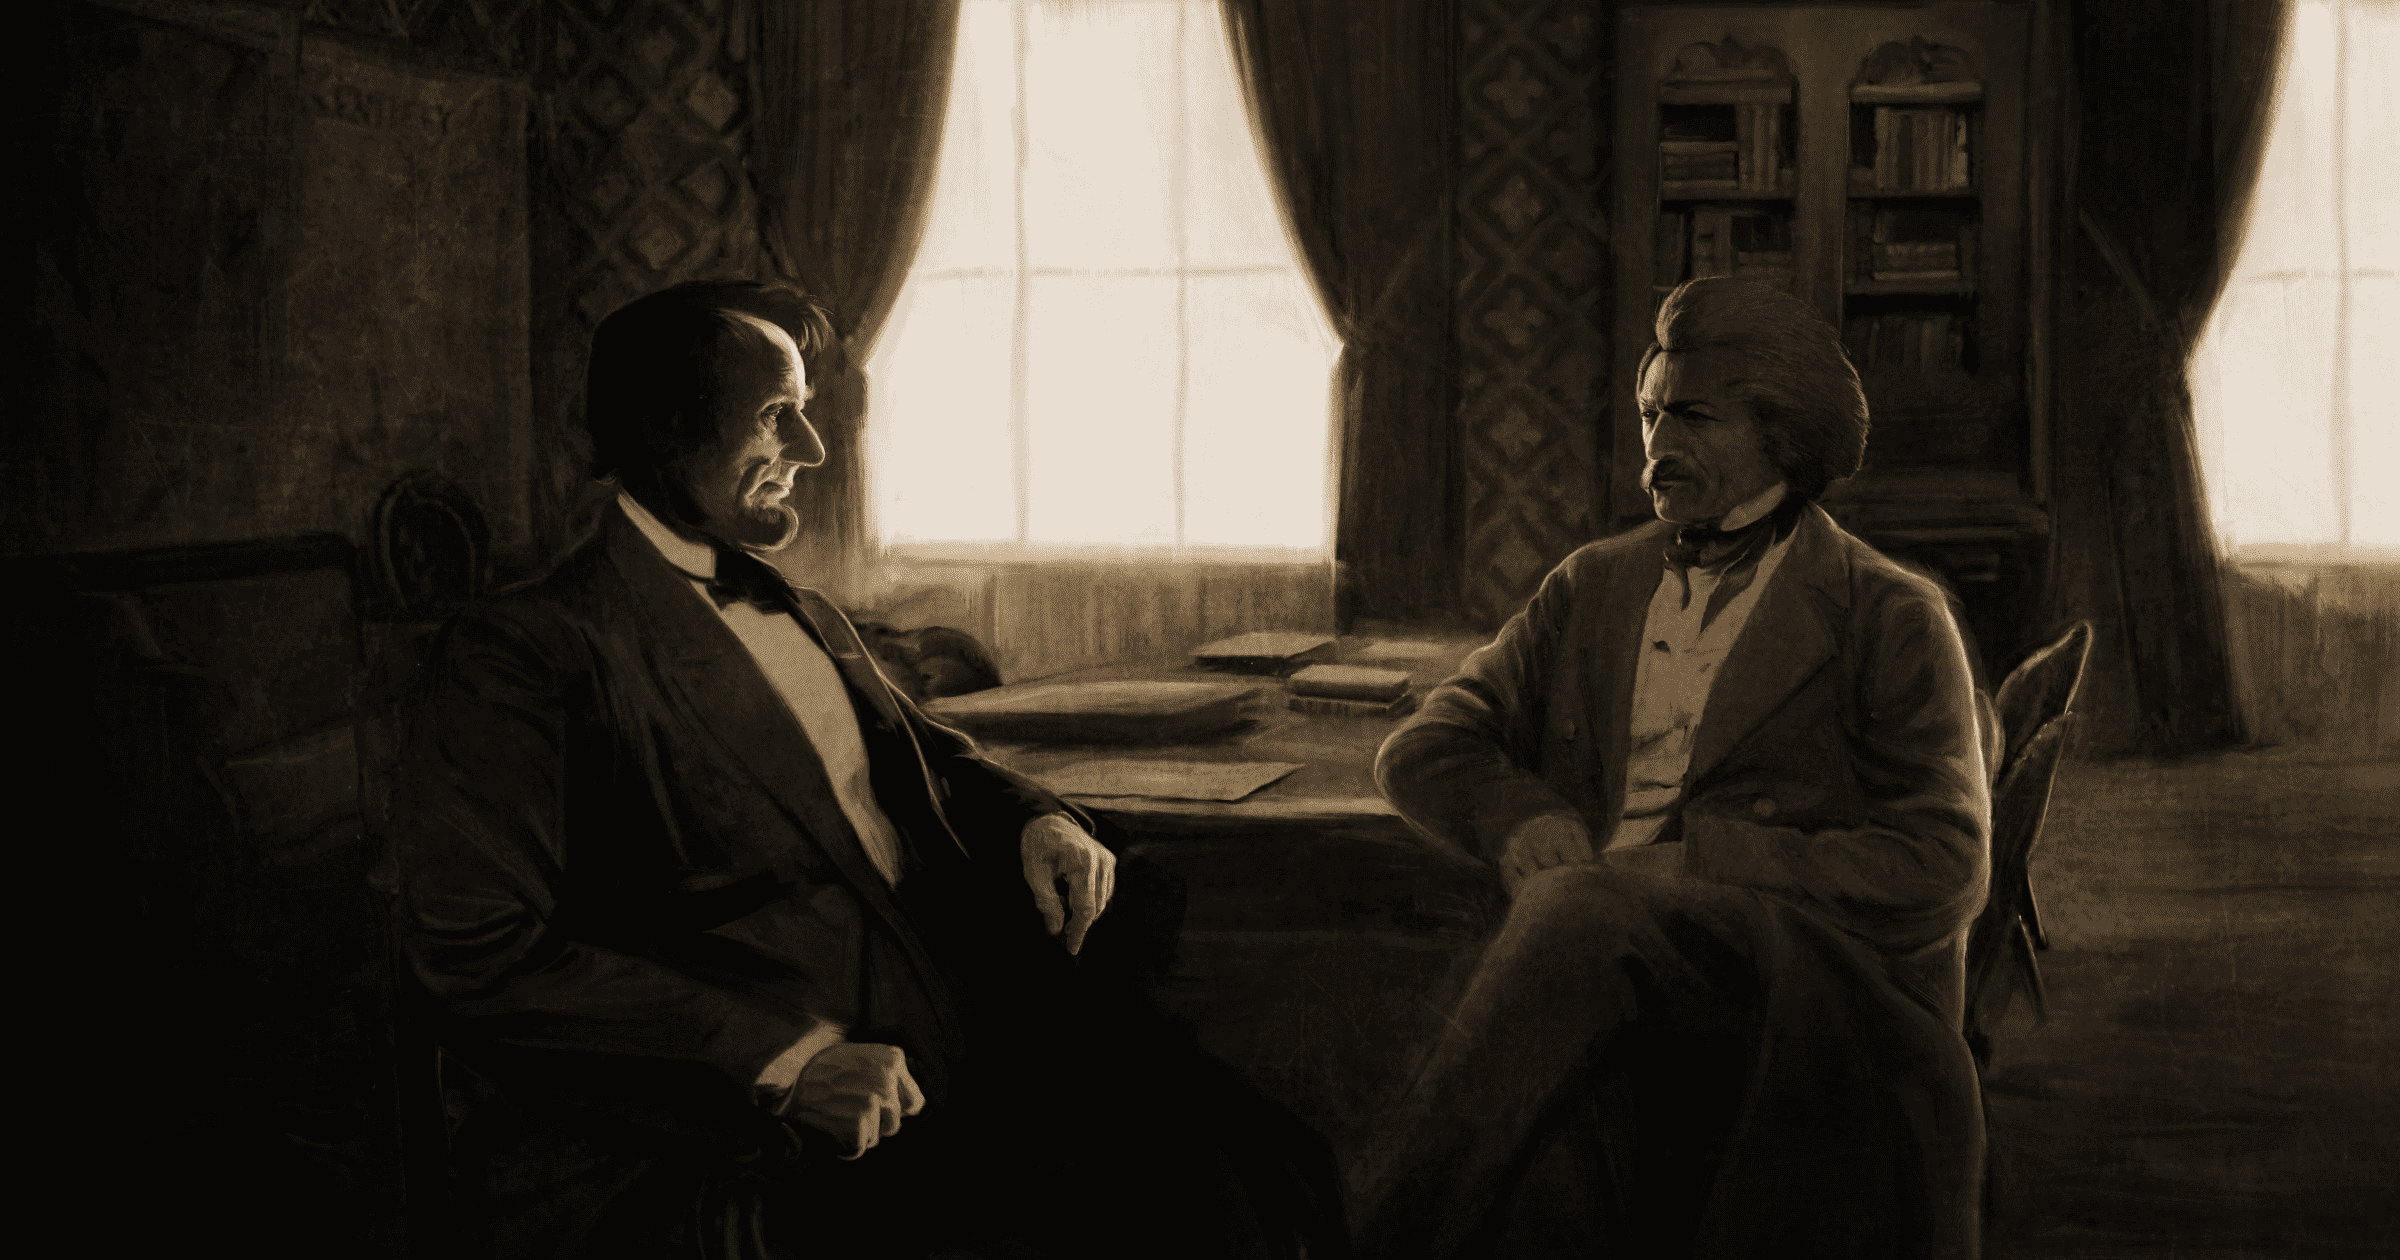 Apple TV+: “Lincoln’s Dilemma” Documentary Series to Premiere February 18